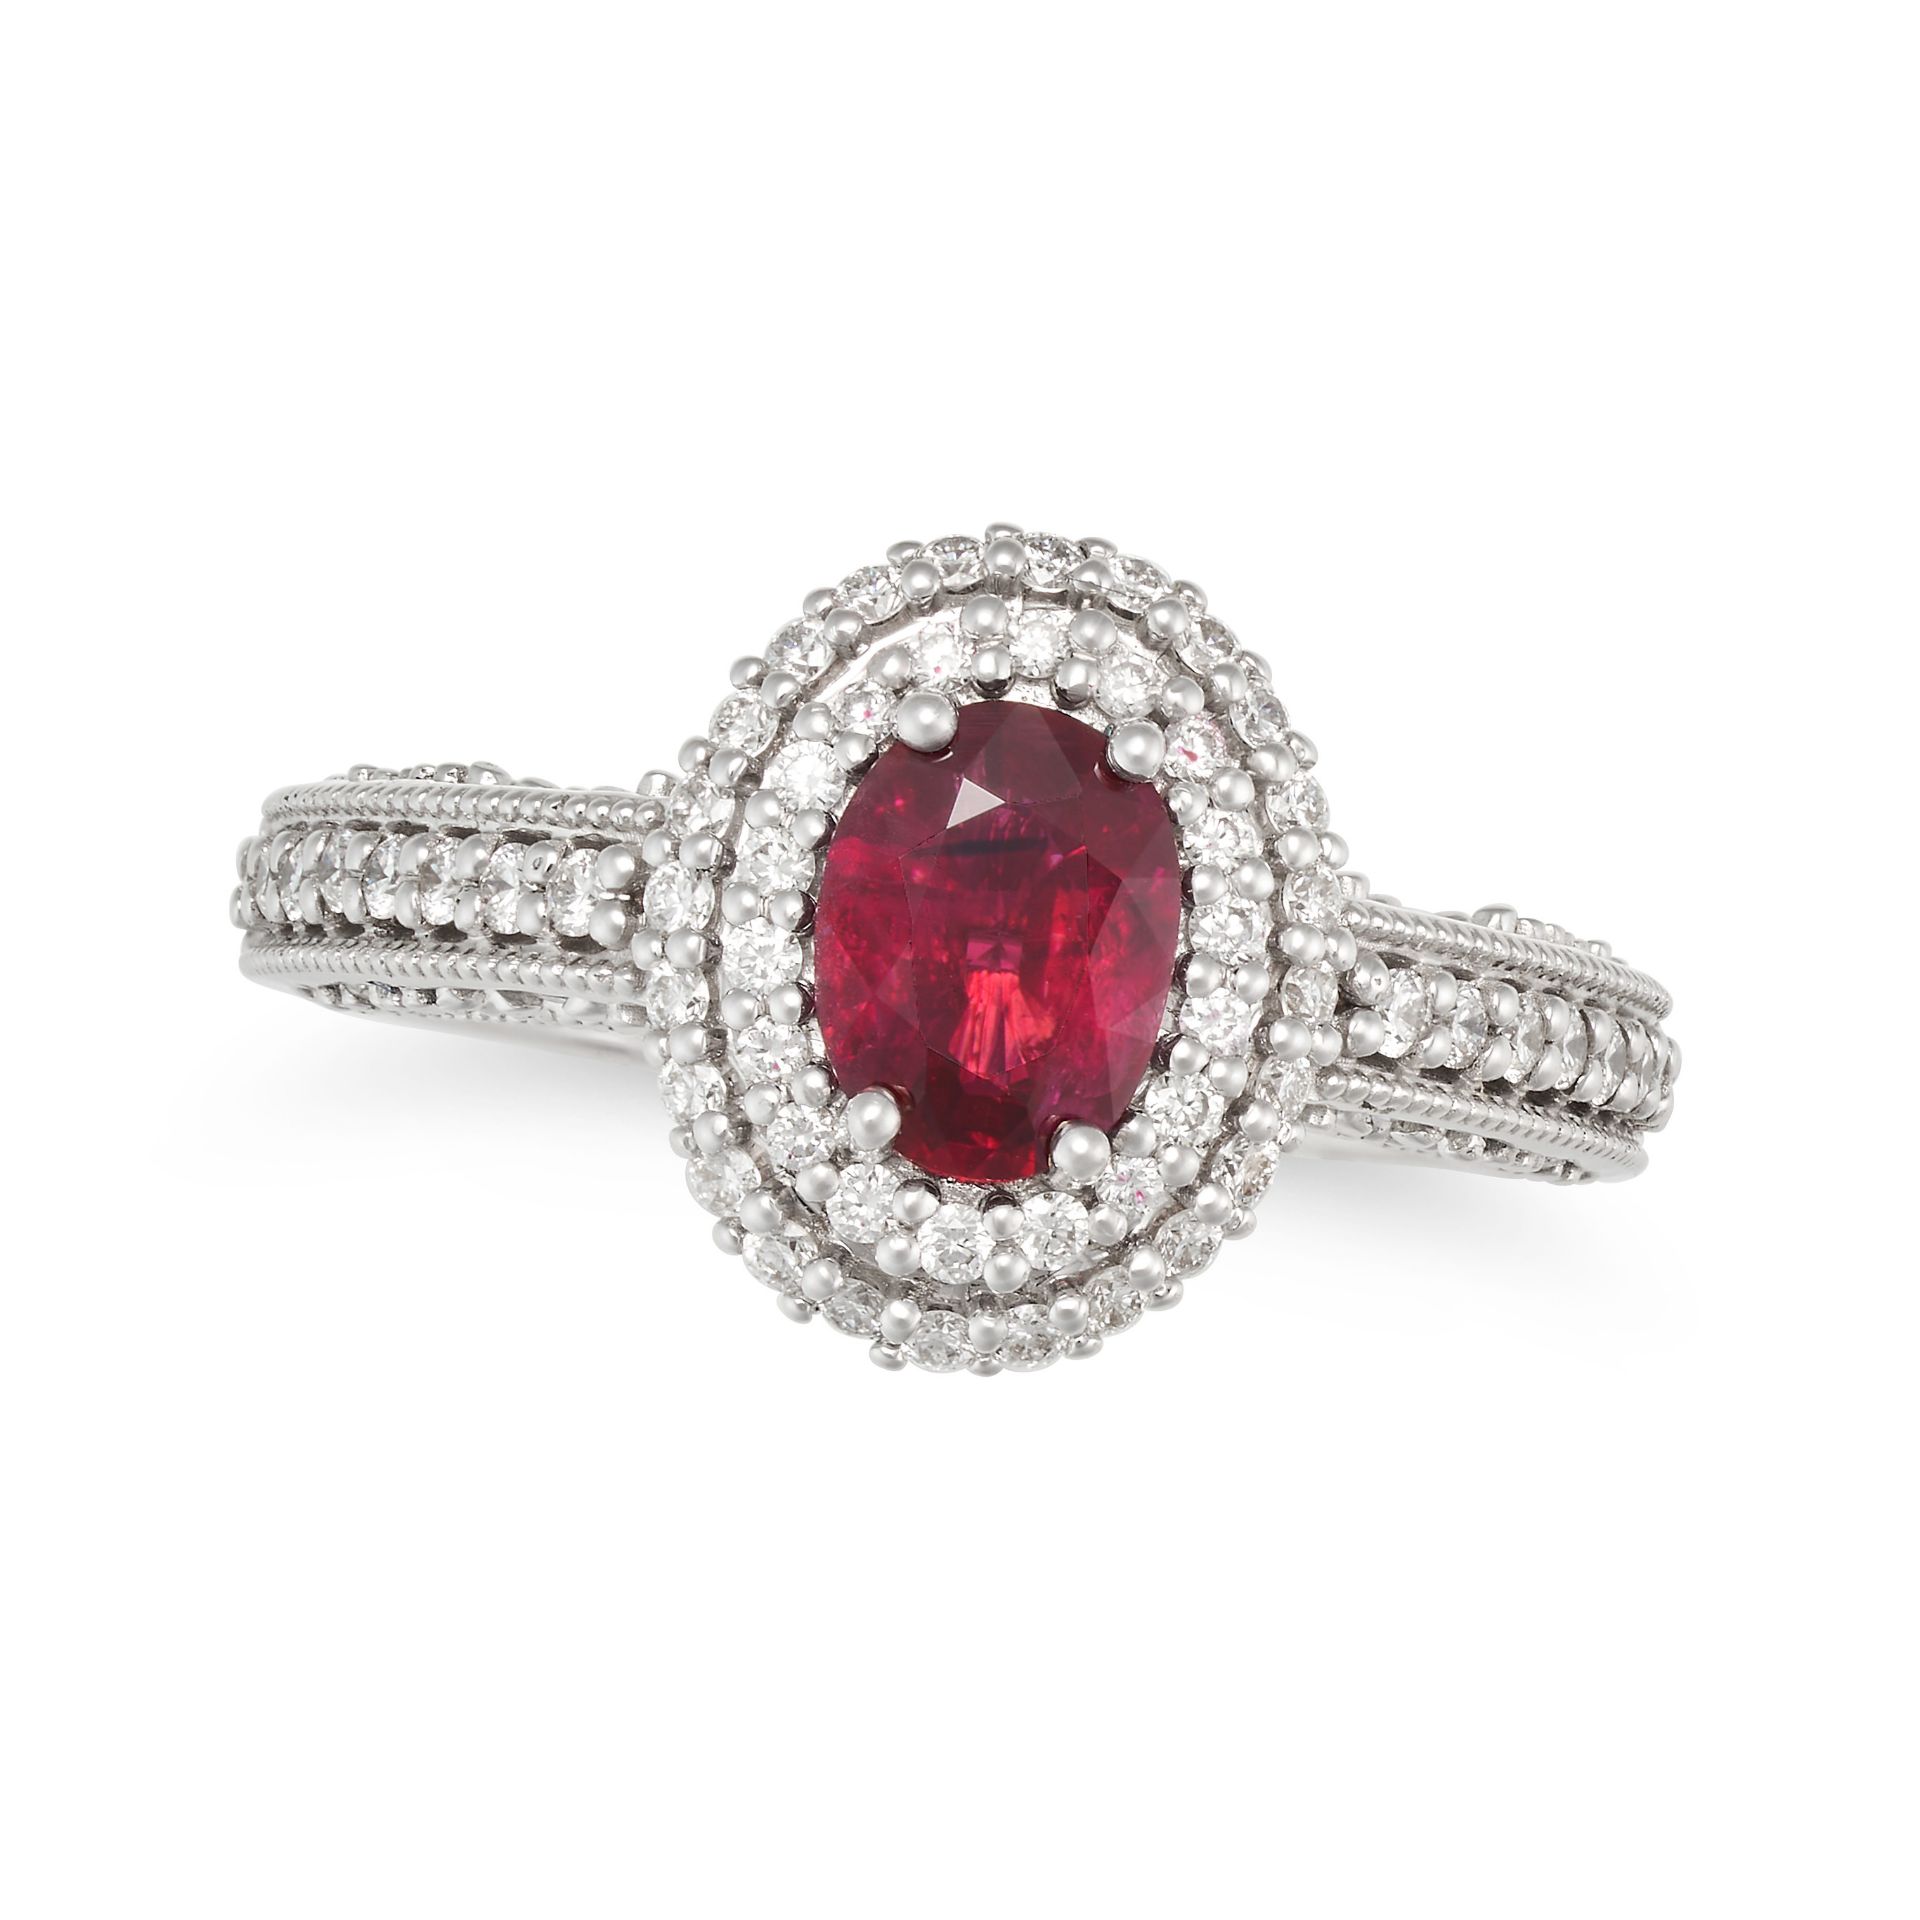 A PIGEON'S BLOOD BURMA NO HEAT RUBY AND DIAMOND RING in 18ct white gold, set with an oval cut rub...